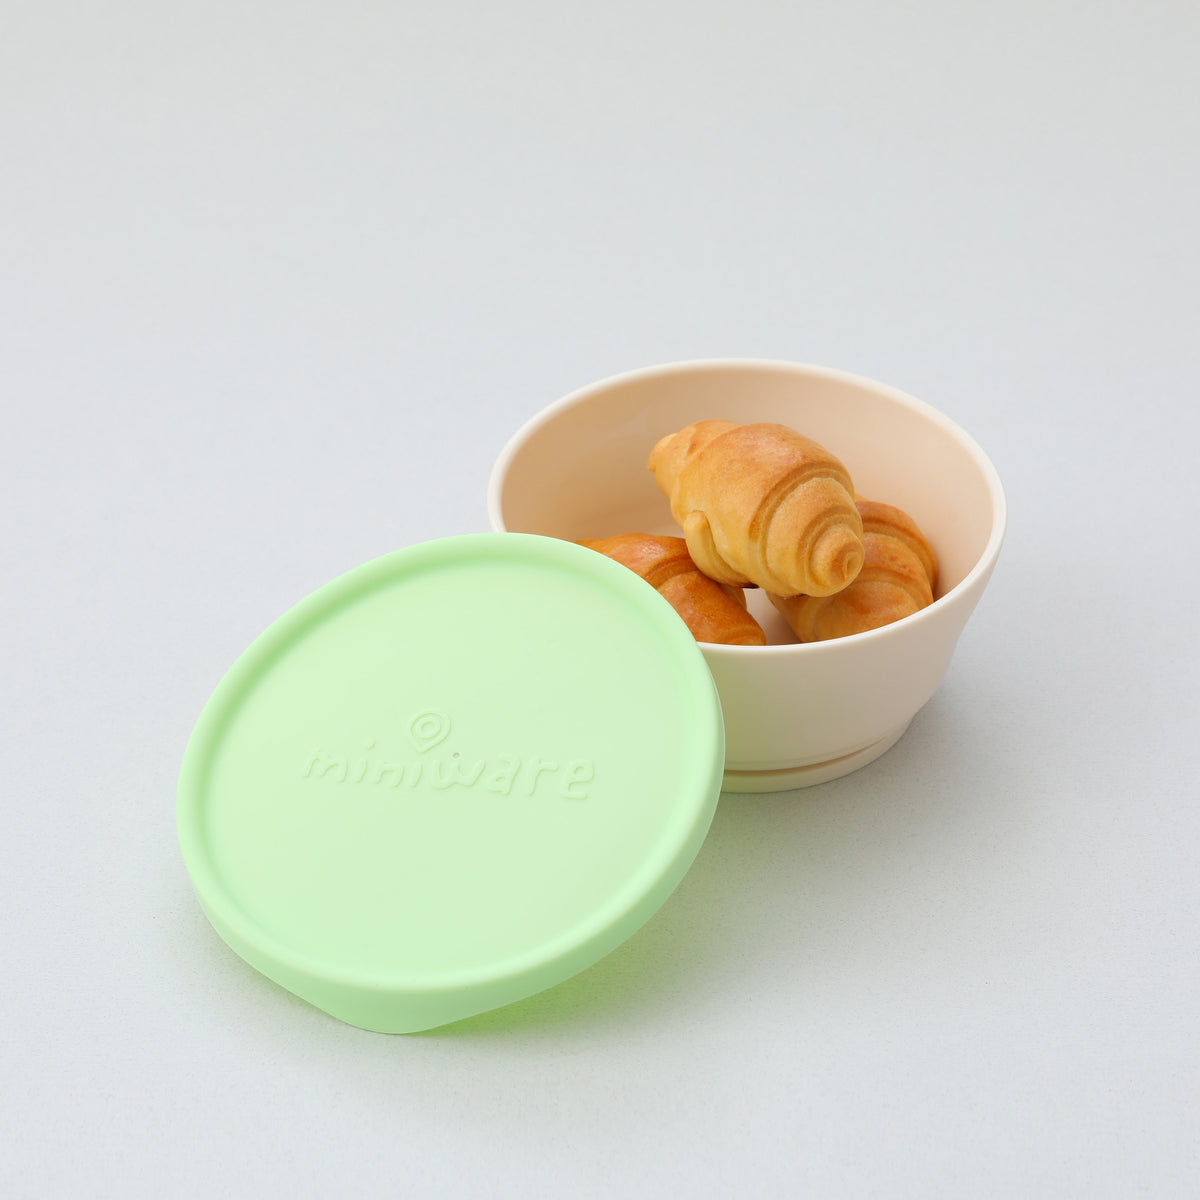 miniware-first-bite-set-pla-cereal-suction-bowl-vanilla-+-silicone-spoon-and-cover-in-cotton-keylime- (16)